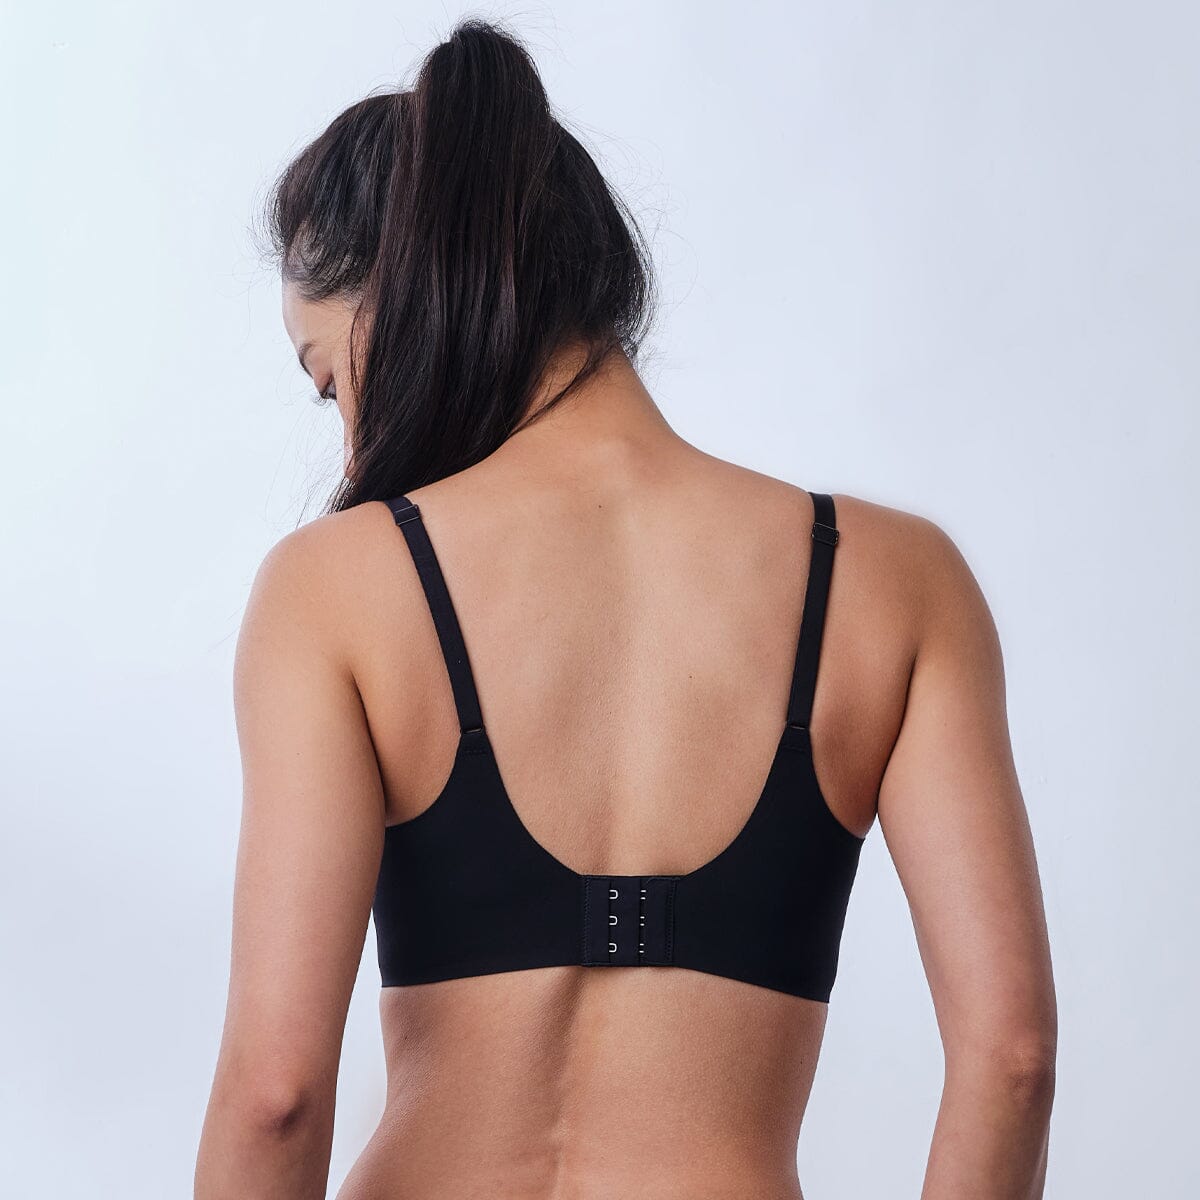 Signature Airy REmatrixpad™ REextraSkin™ & REsiltech™ Wing W-Shape support Non Wired Medium Push Up Bra Bra Her own words 